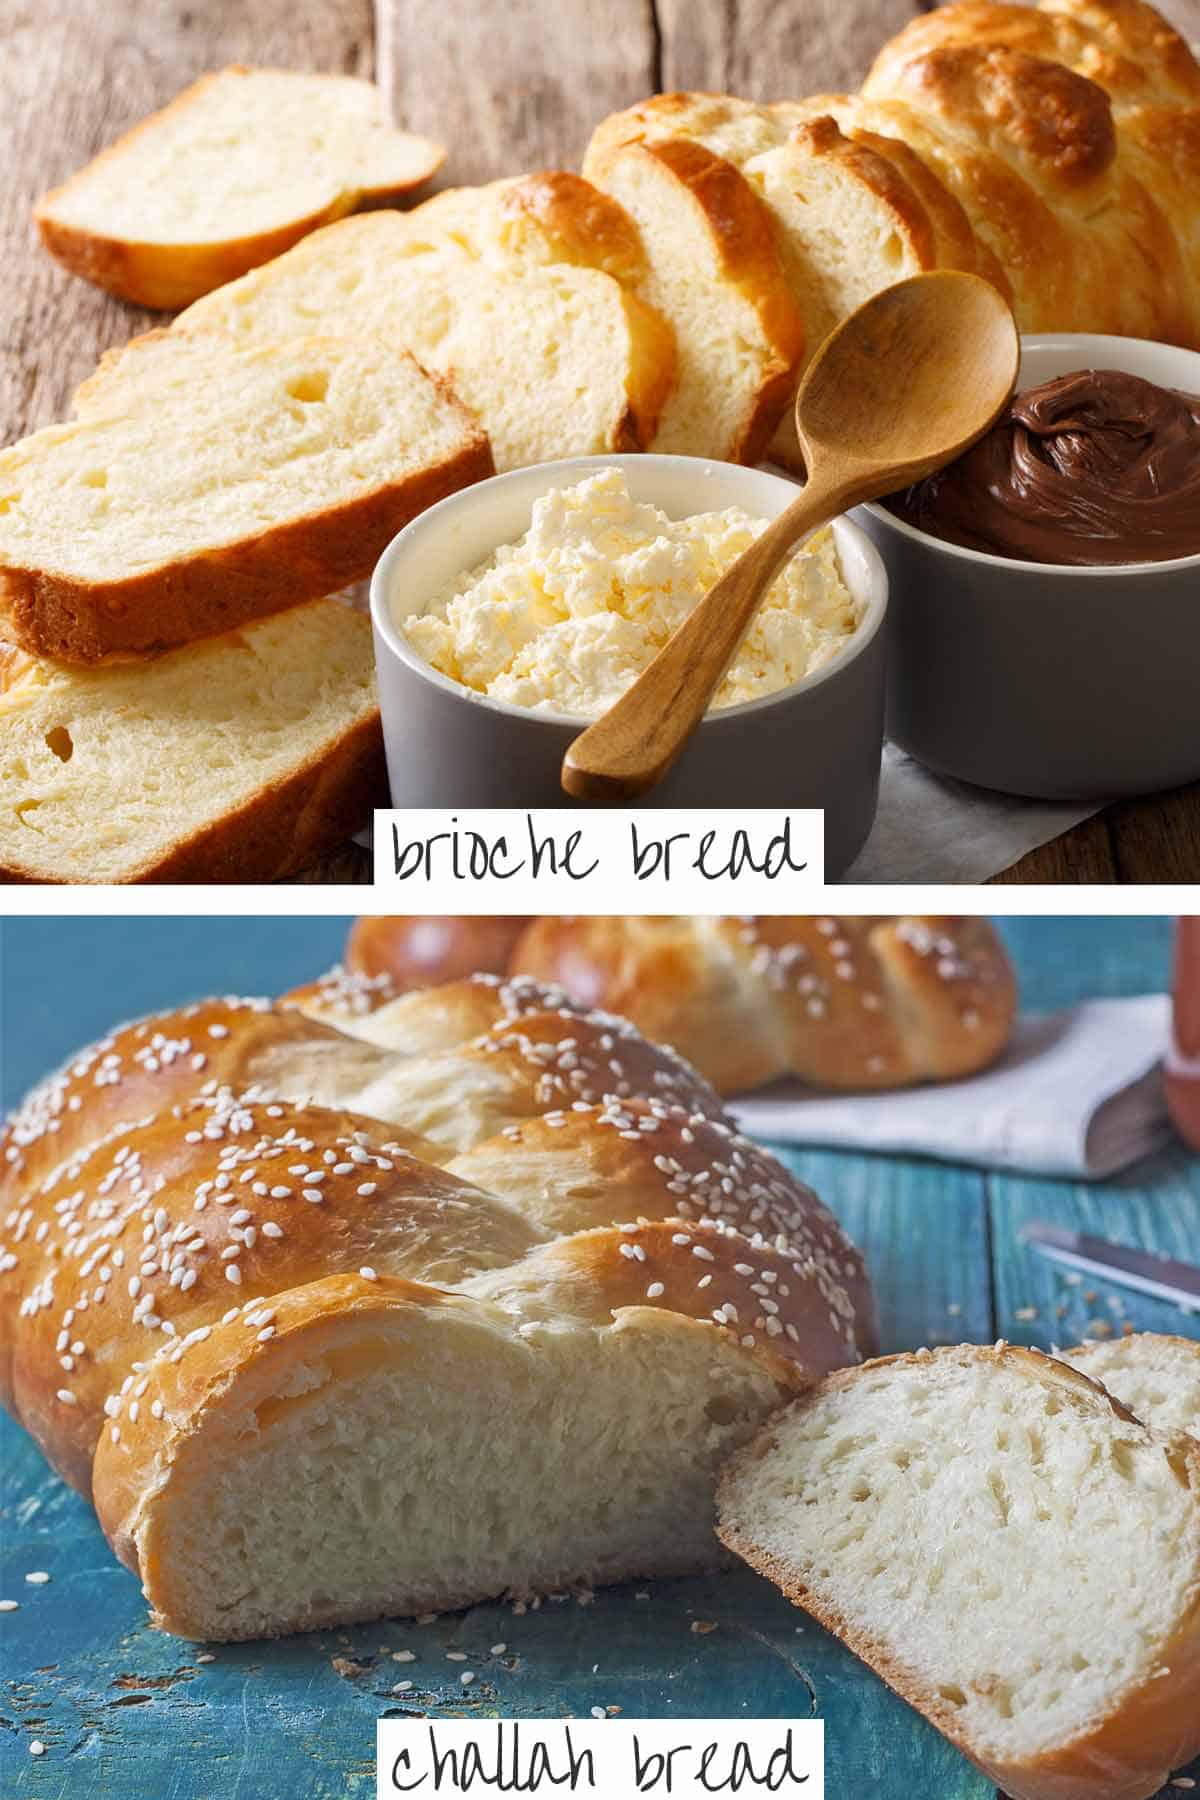 Sliced brioche bread with mascarpone spread and challah bread with sesame seeds.